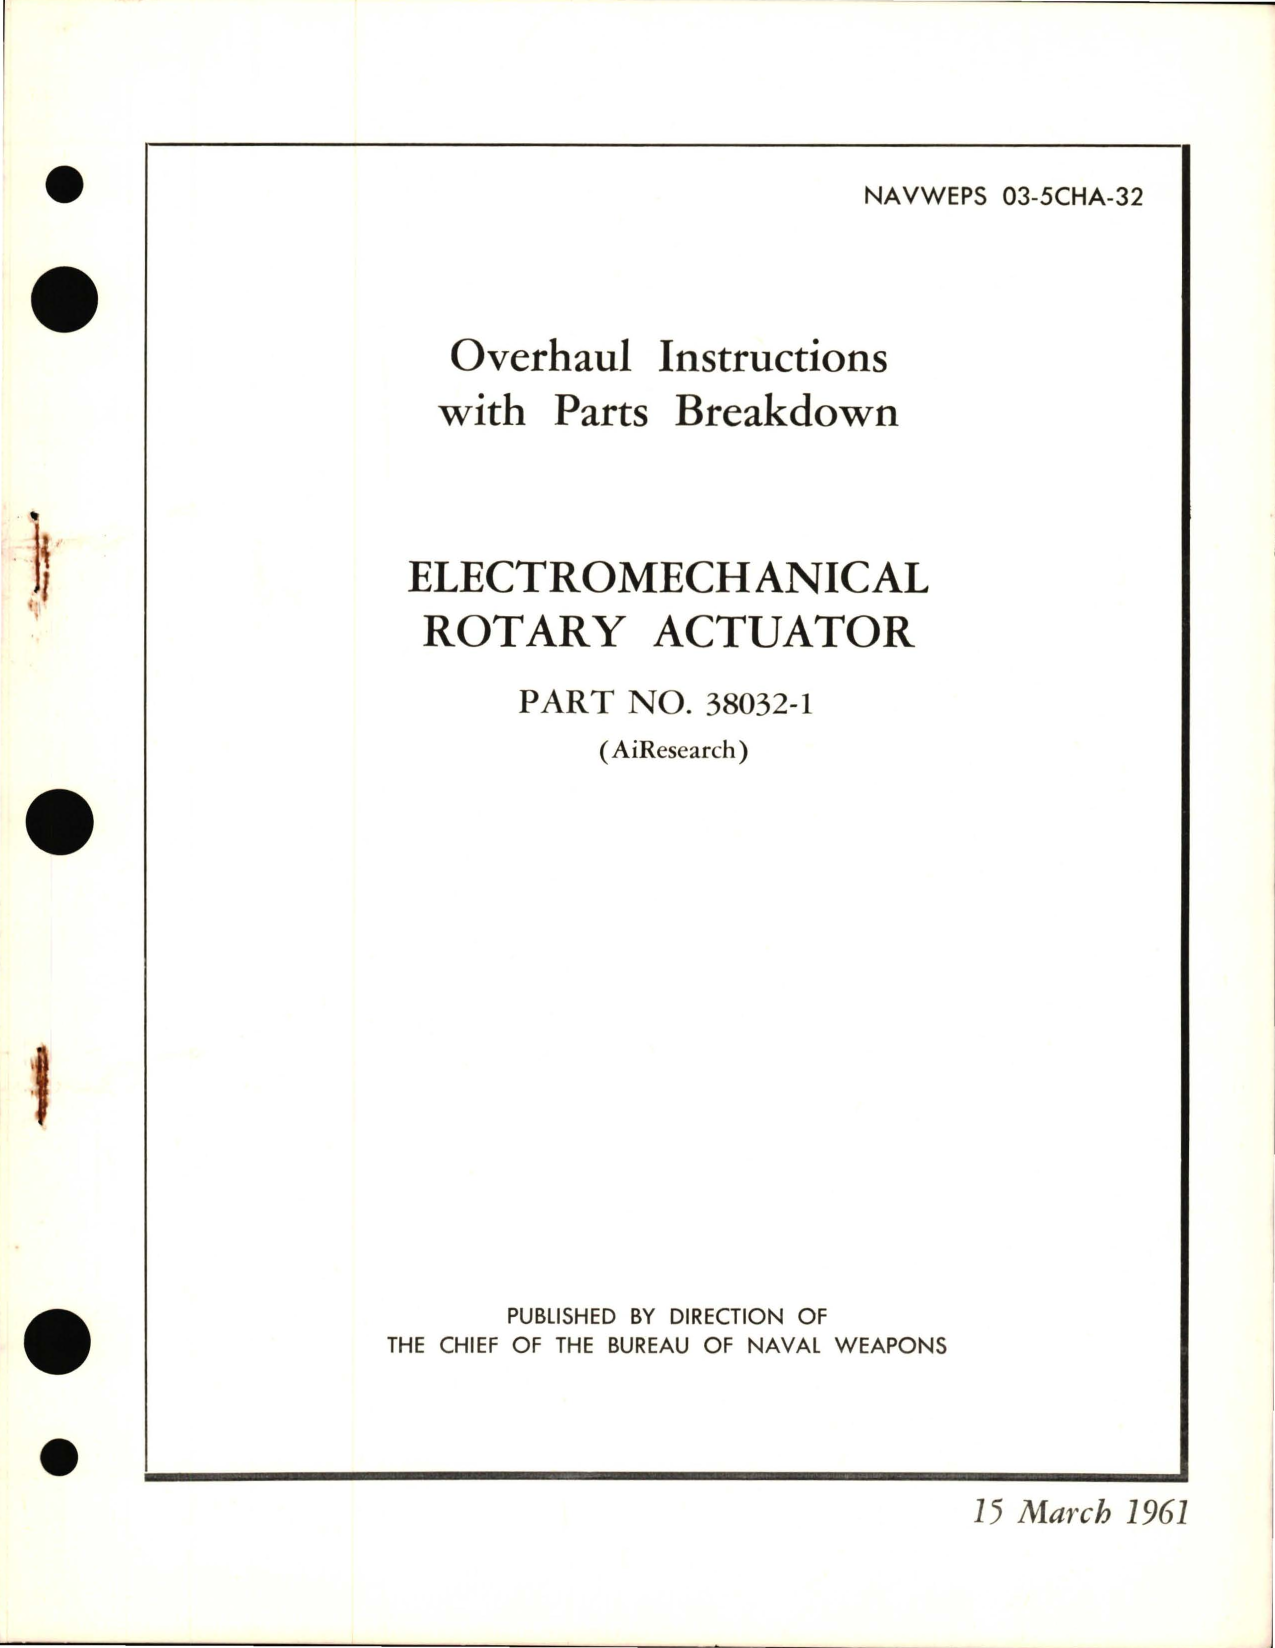 Sample page 1 from AirCorps Library document: Overhaul Instructions with Parts Breakdown for Electromechanical Rotary Actuator - Part 38032-1